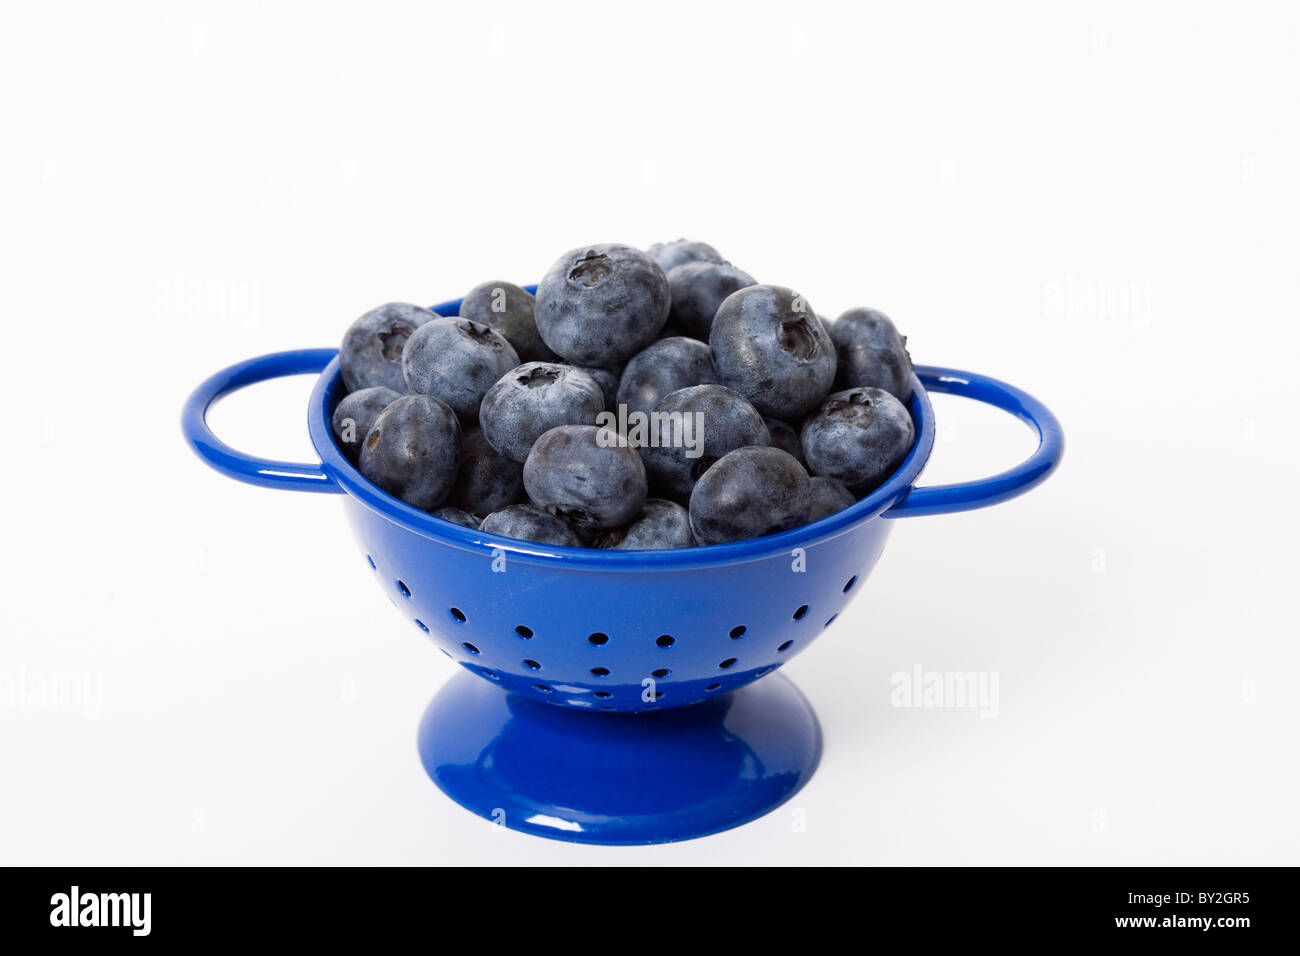 A small blue colander filled with fresh blueberries Stock Photo